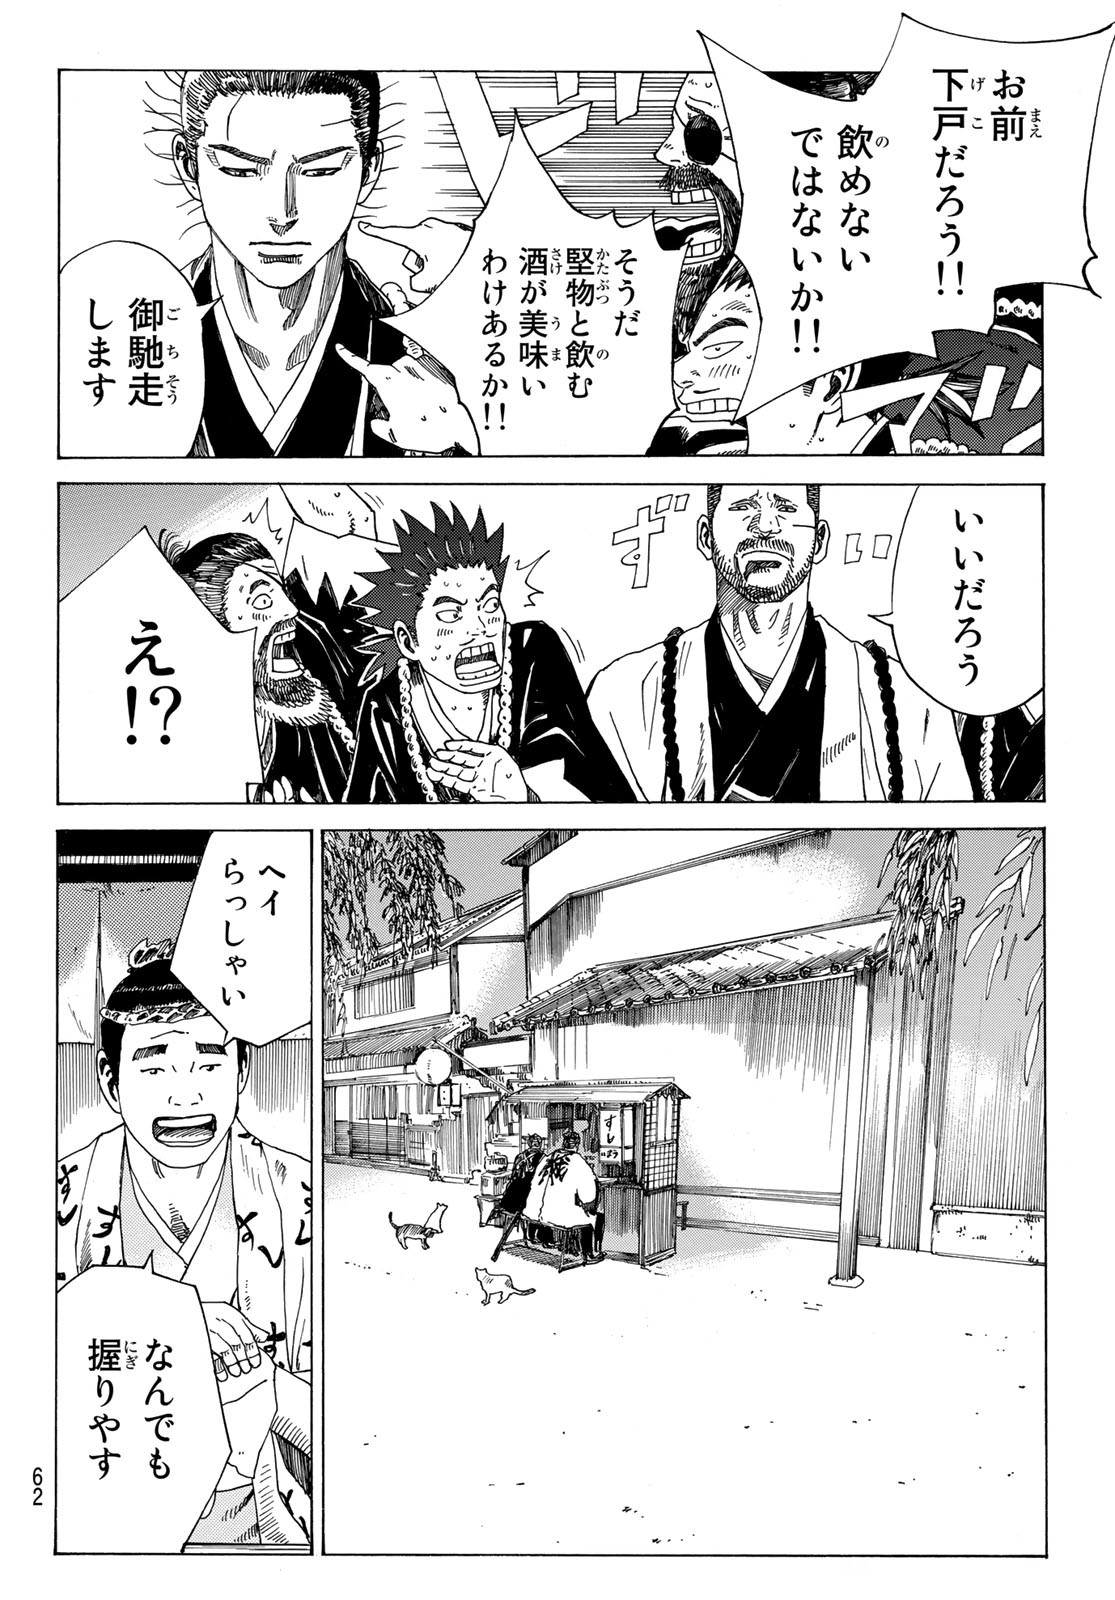 An Mo Miburo 第79話 - Page 4